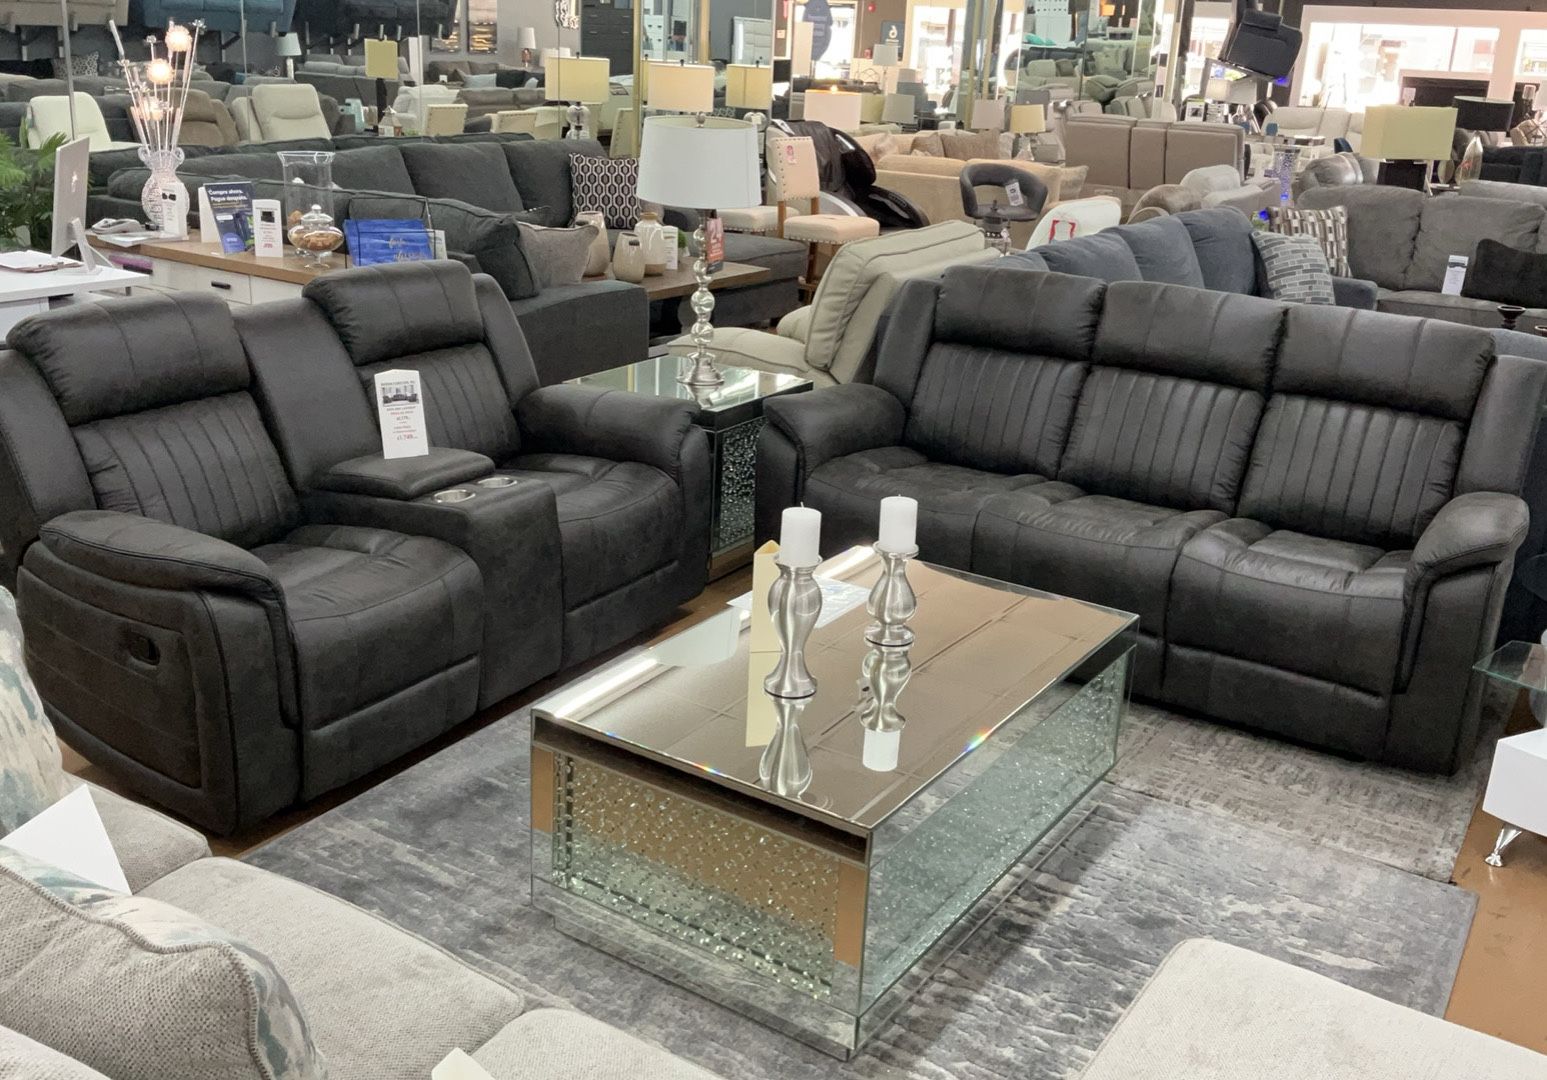 Recliners Sofa & Loveseat Available In Dark Gray Or Light Brown Colors